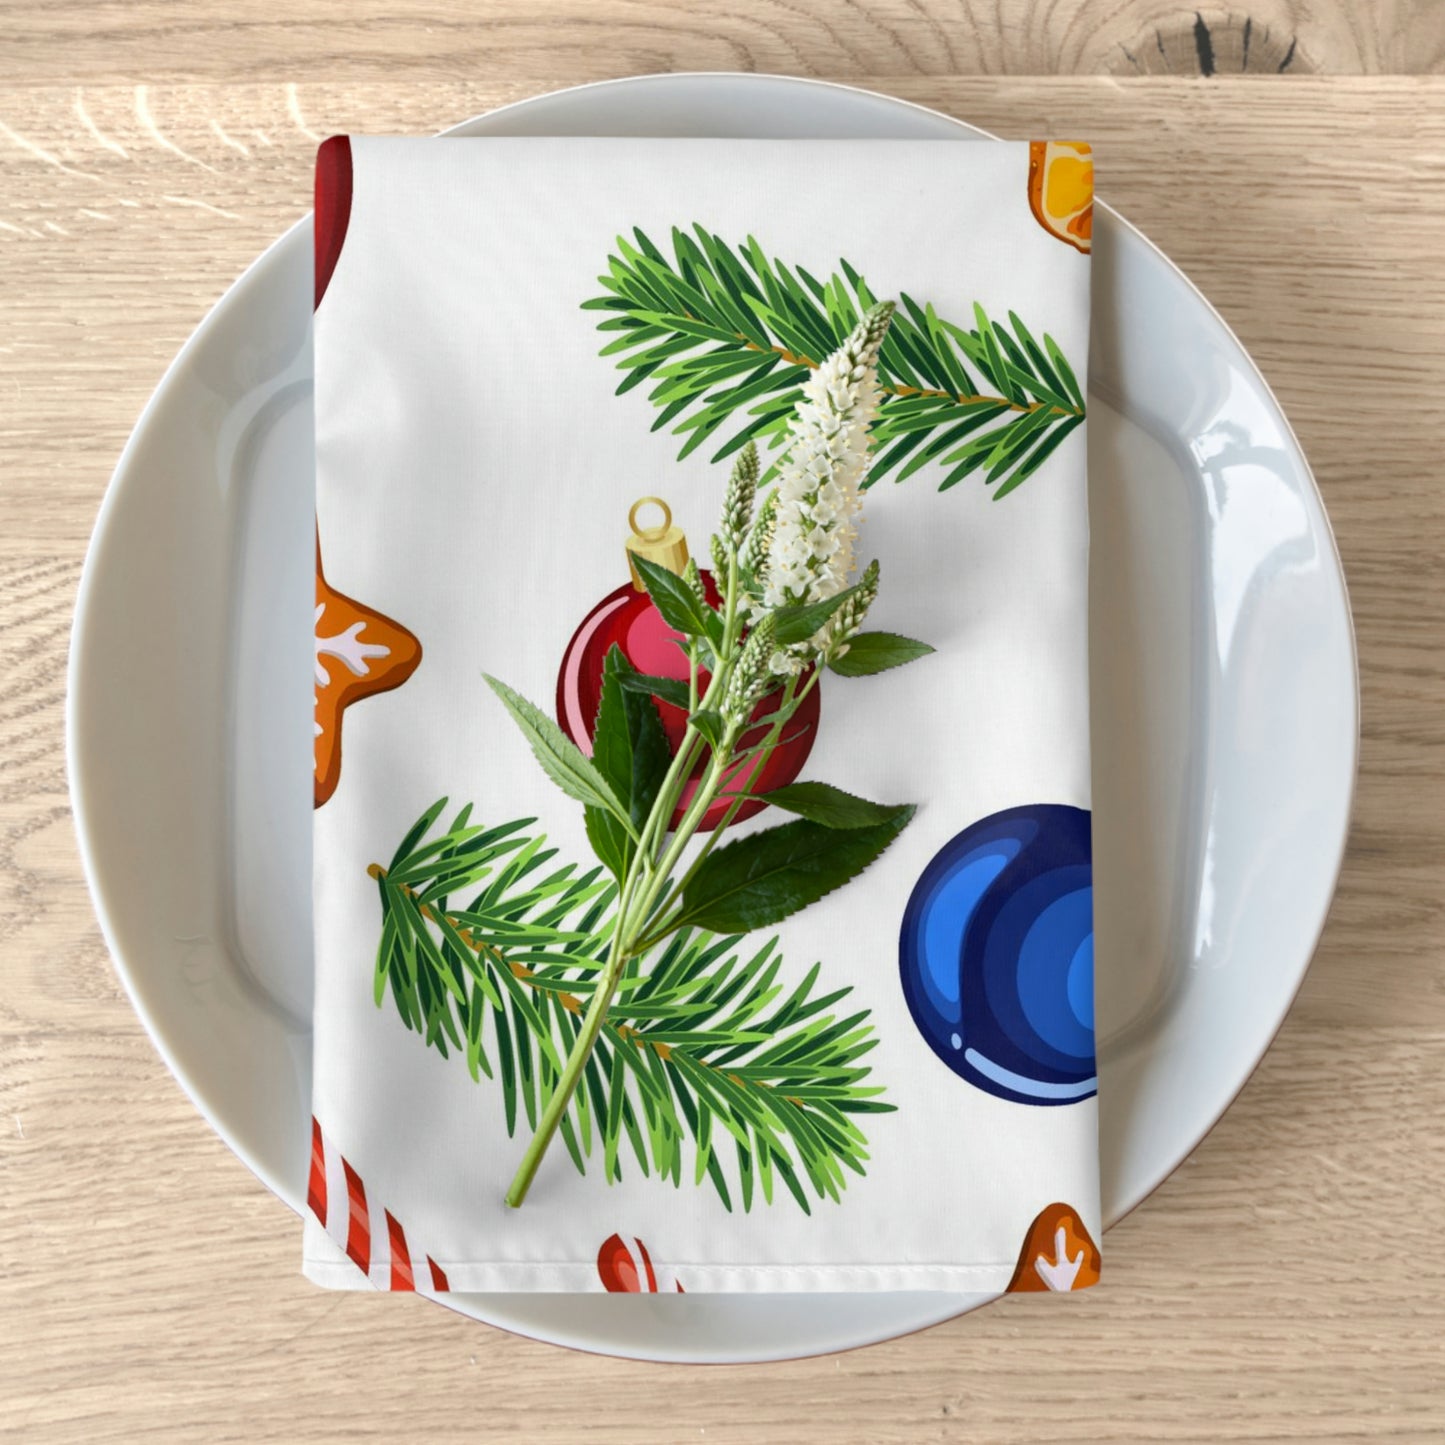 Candy Canes and Ornaments Napkins Set of 4